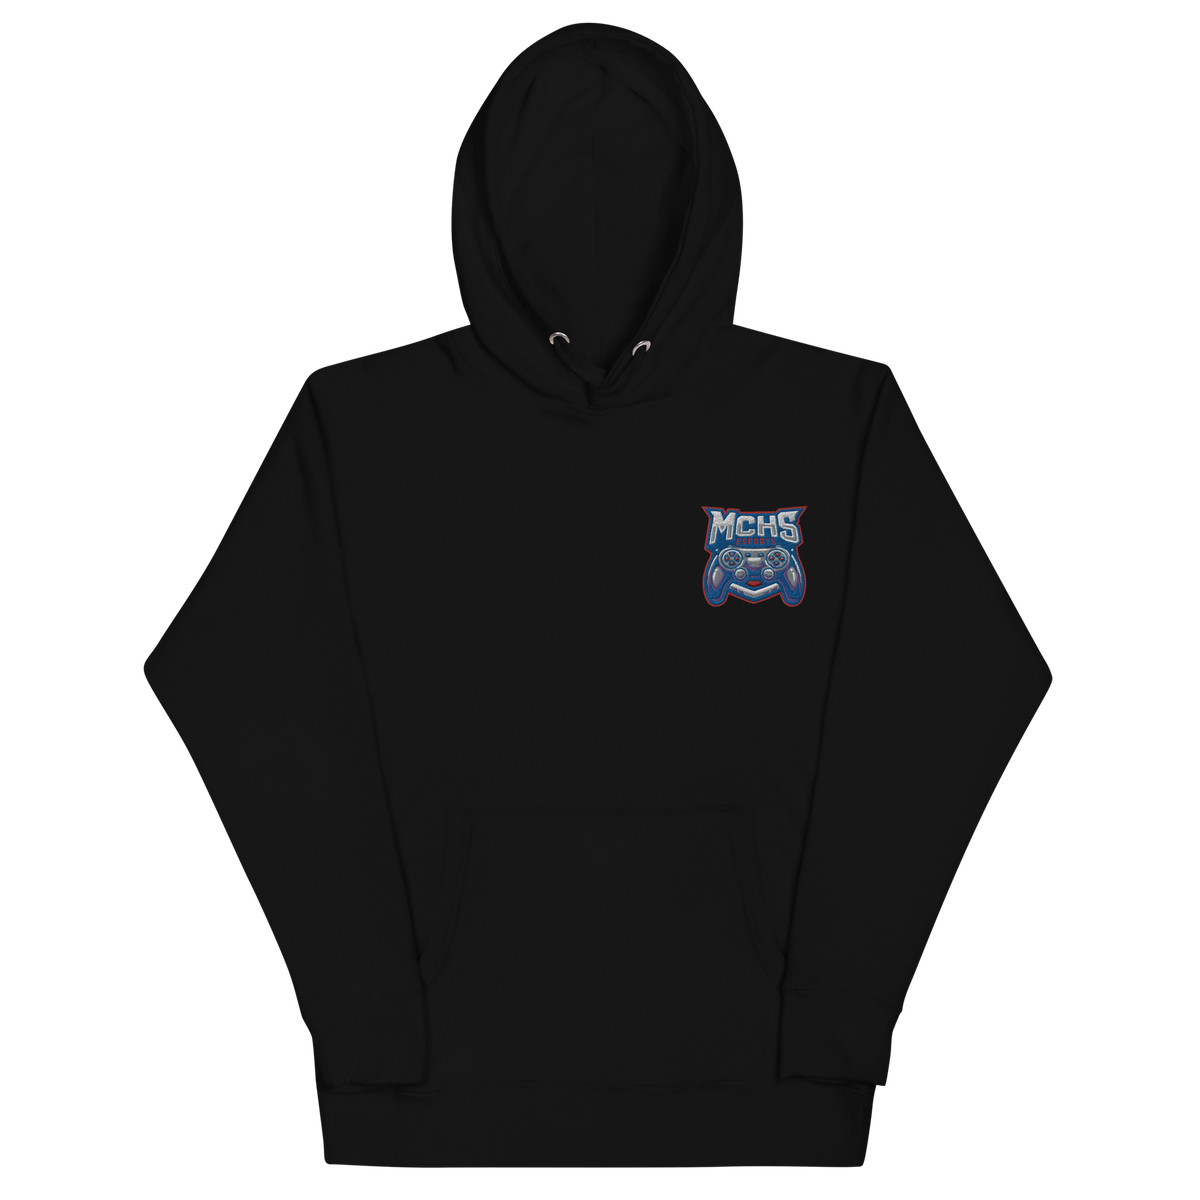 Madison Central High School | On Demand | Embroidered Unisex Hoodie